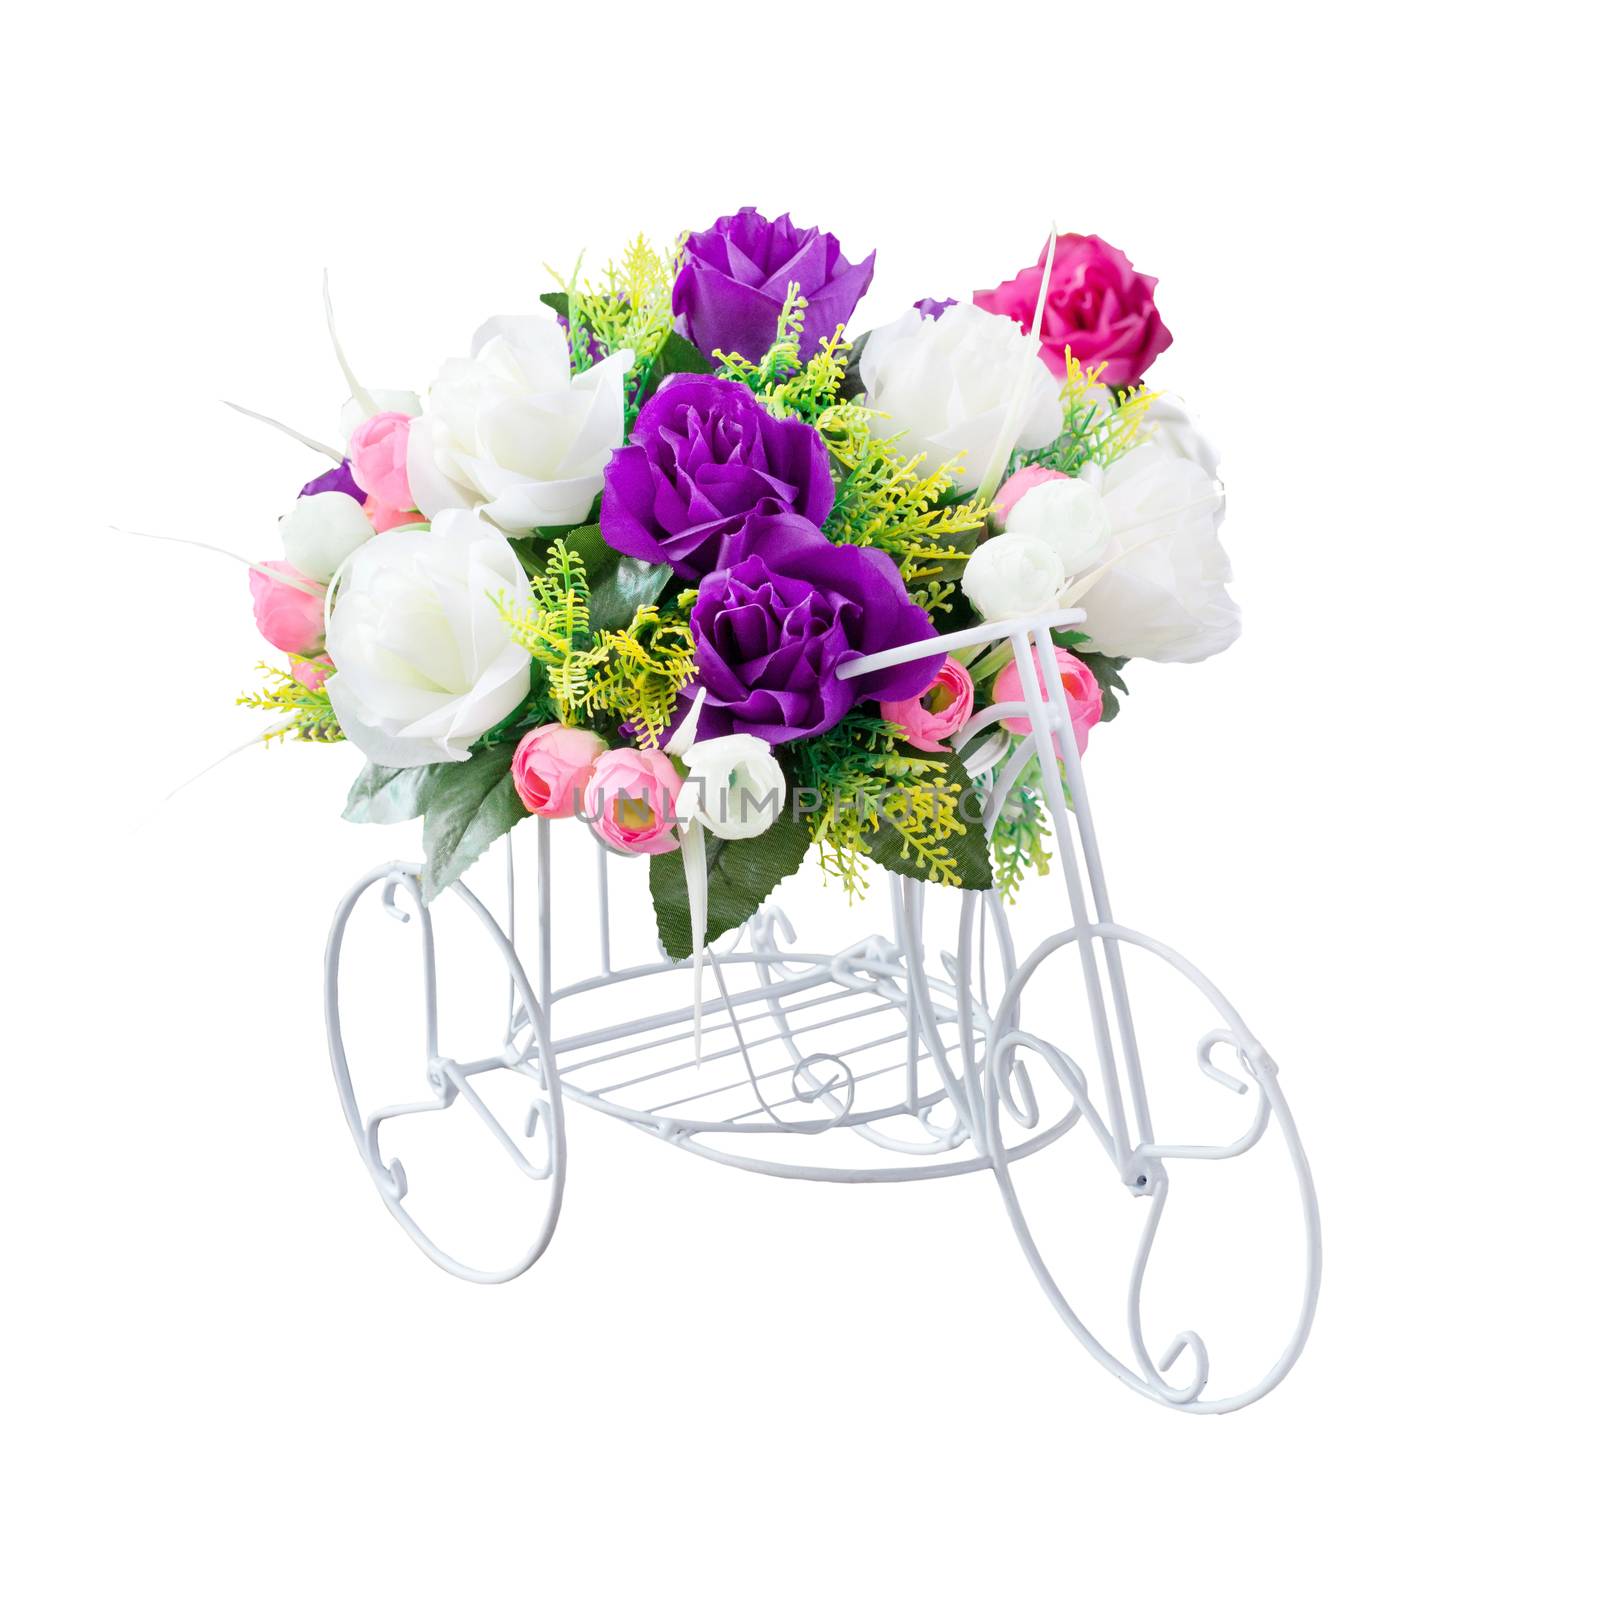 bouquet flower and hand made bicycle form use for multipurpose by khunaspix